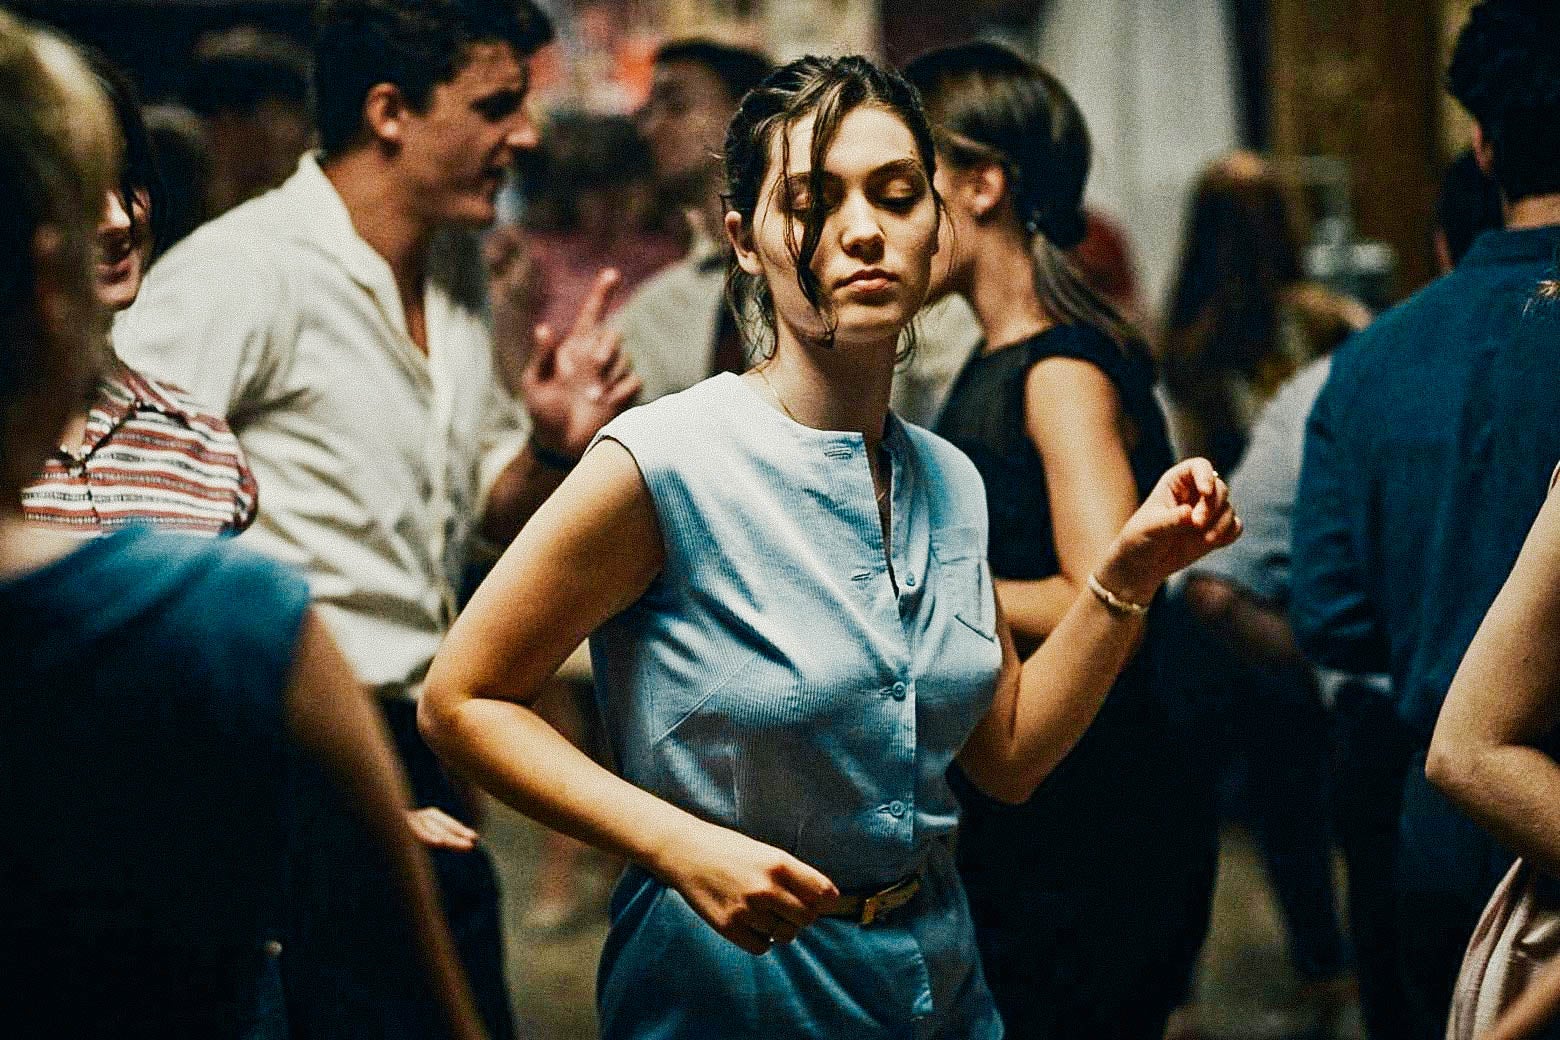 A slim young woman with fair skin and brown bangs and a blue 1960s dress dances on her own among a crowd of fellow young people, her eyes cast down.